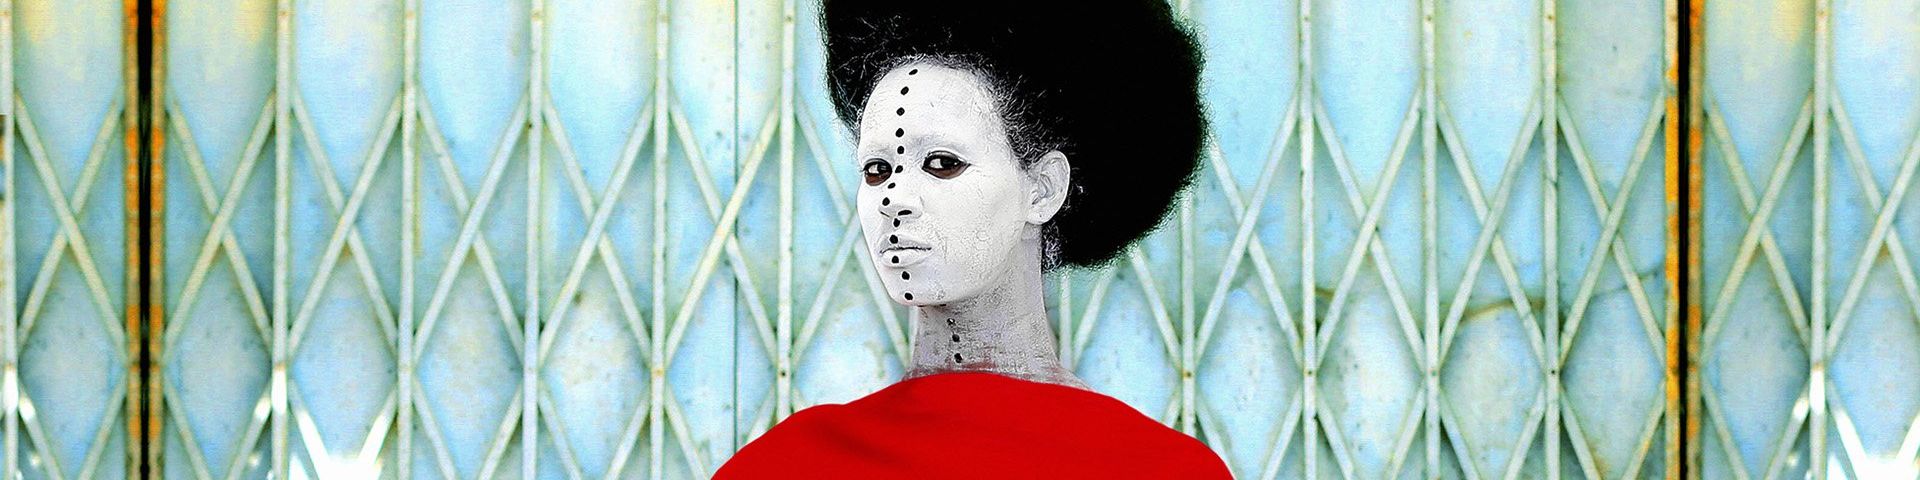 A woman stands in front of a rusting security grille. She wears a dramatic red cape and her head is framed by a halo of black hair. Her face is painted white and a line of black dots stretches from the top of her forehead to the base of her neck, which are inspired by traditional African body art.